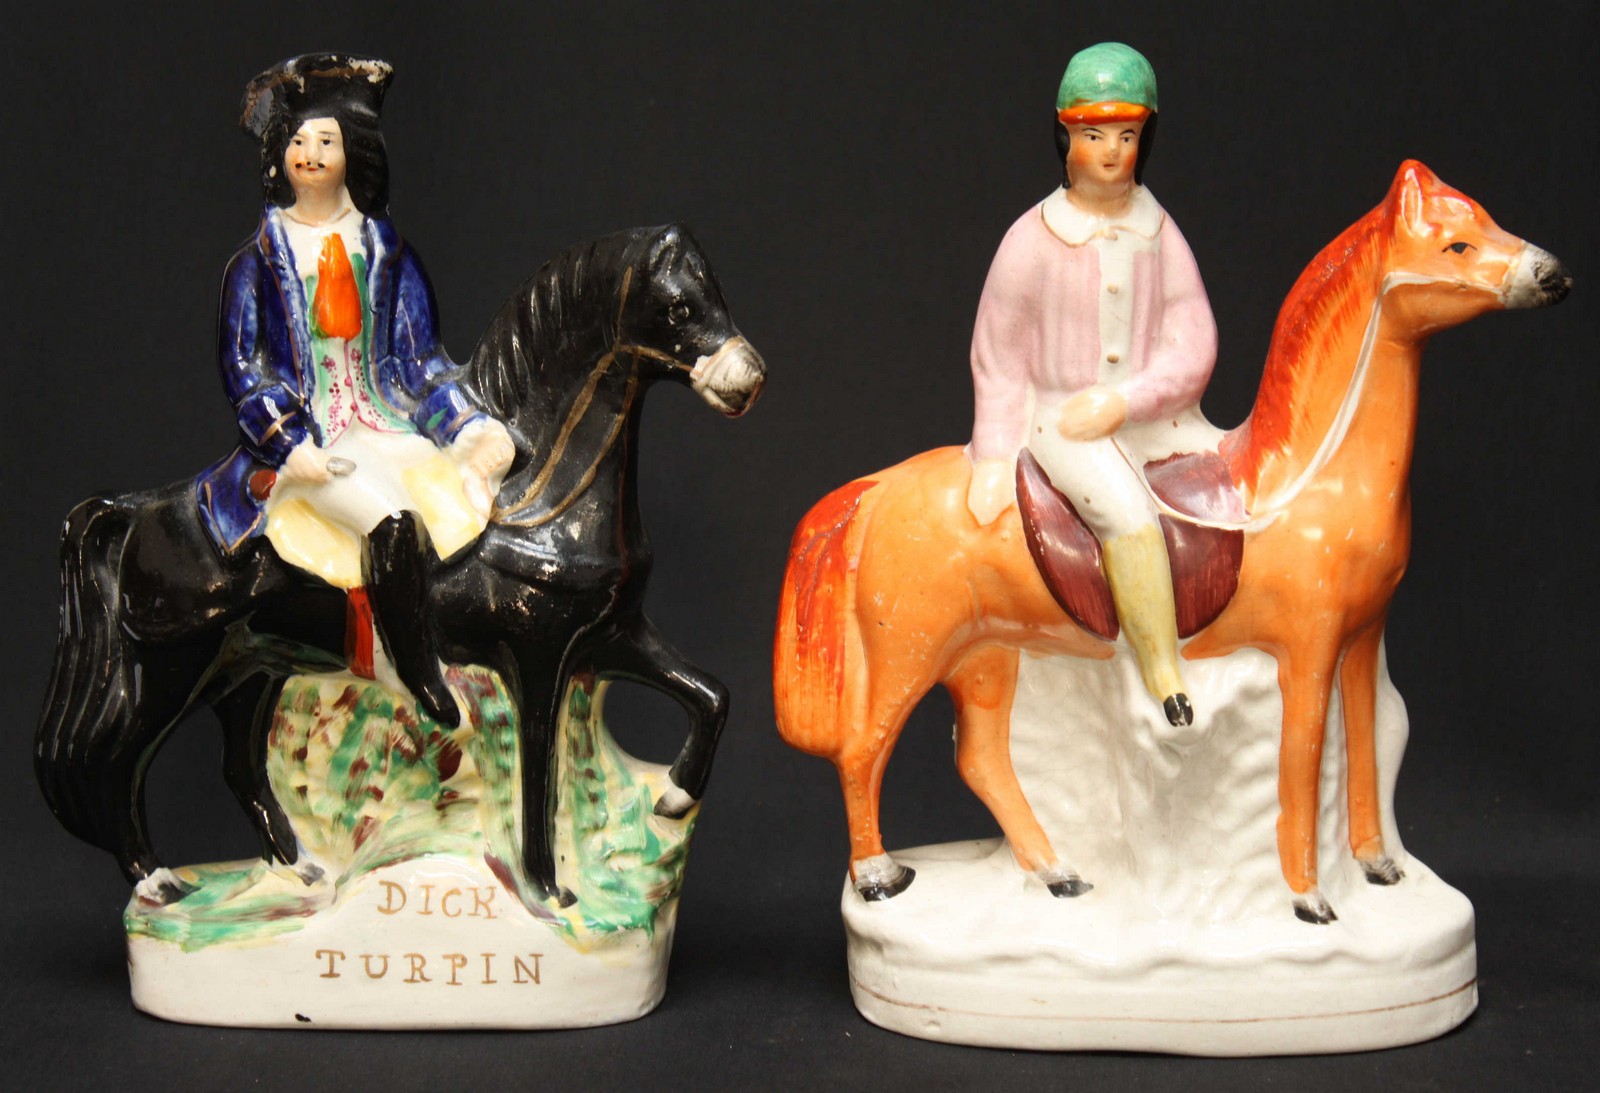 Two Staffordshire pottery 'flatback' figures, 'Dick Turpin' and a rider on horseback.